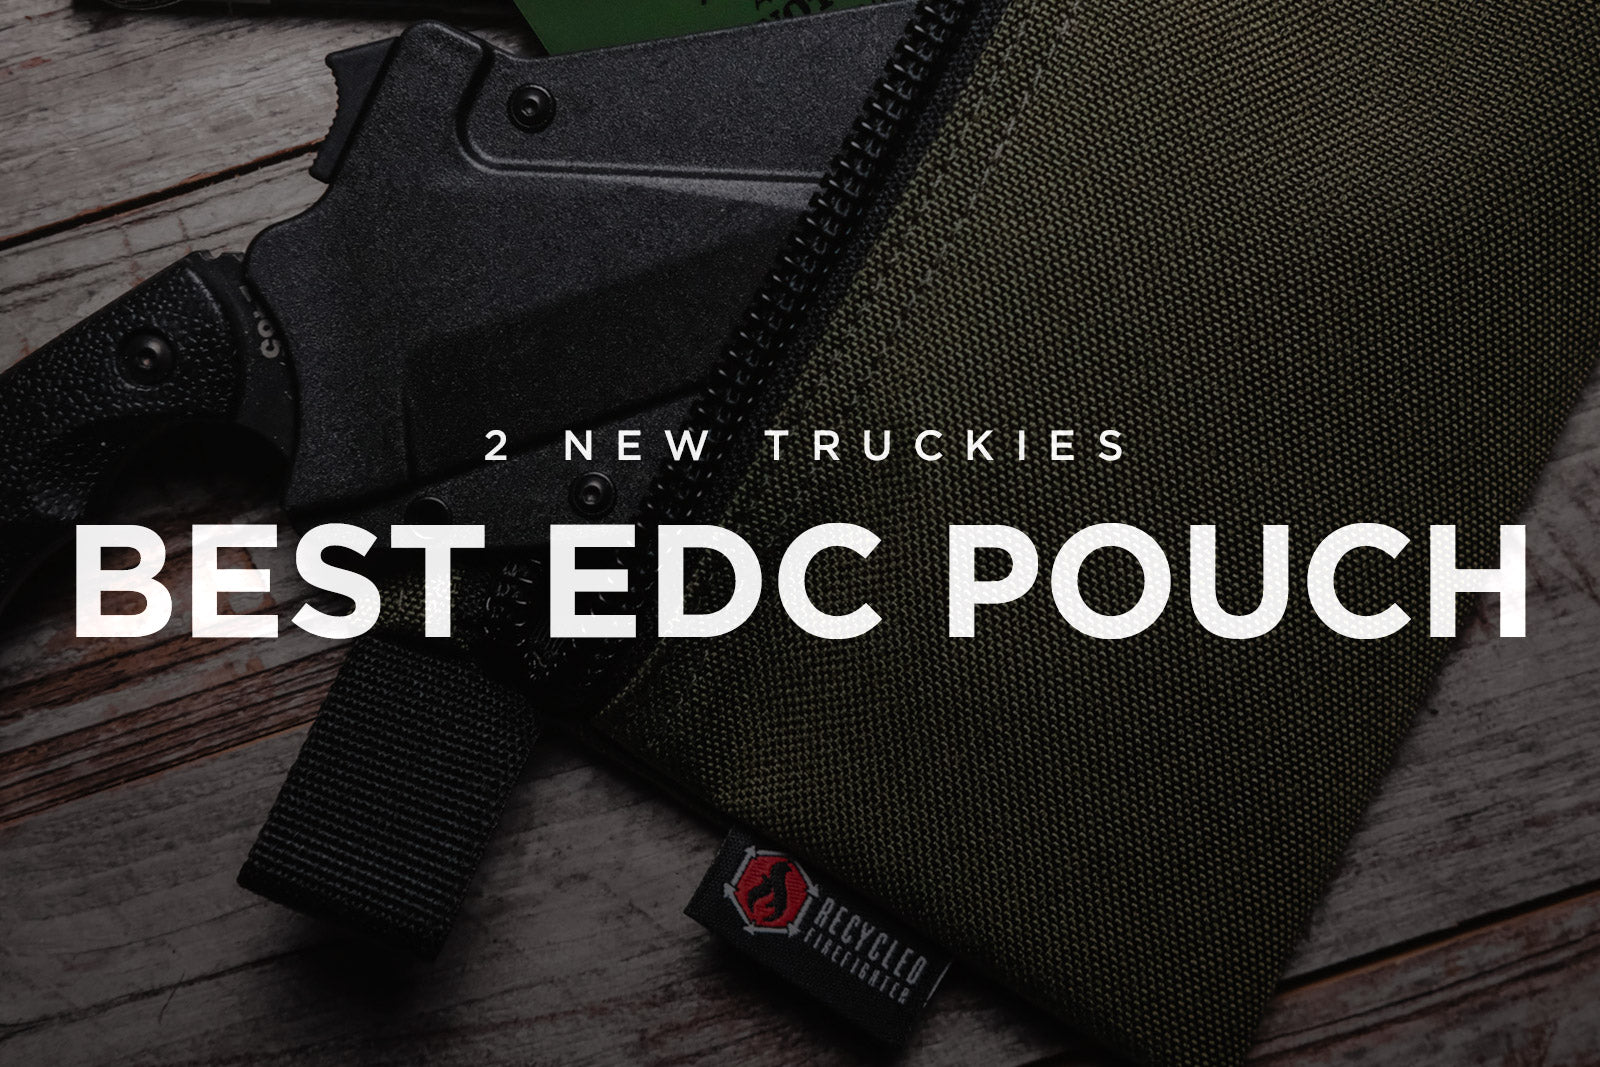 Best Everyday Carry Pouch